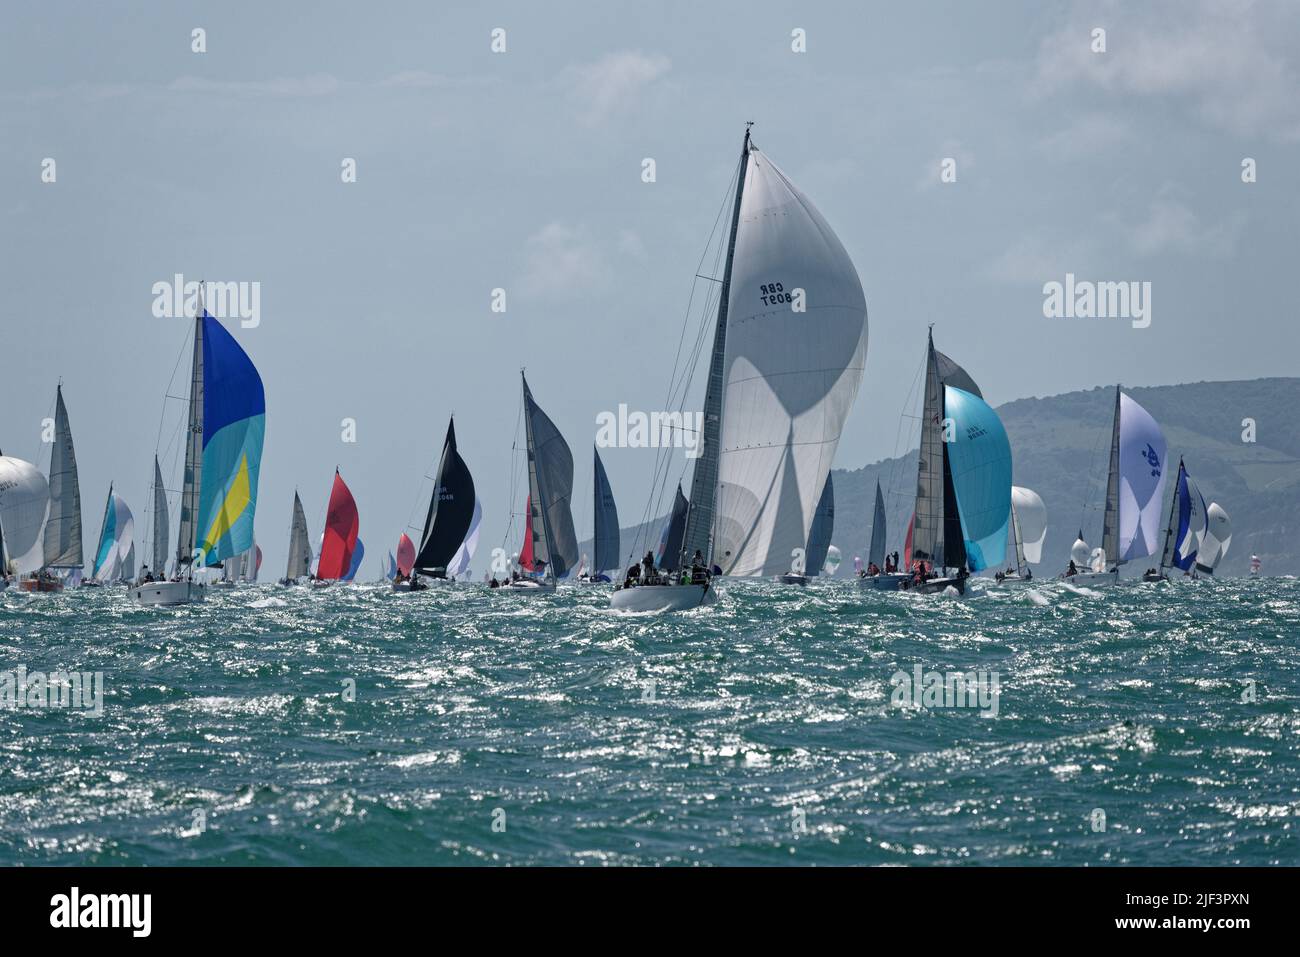 A veritable armada of sailing yachts competing in the Isle of Wight Sailing Club's annual Round The Island Race Stock Photo